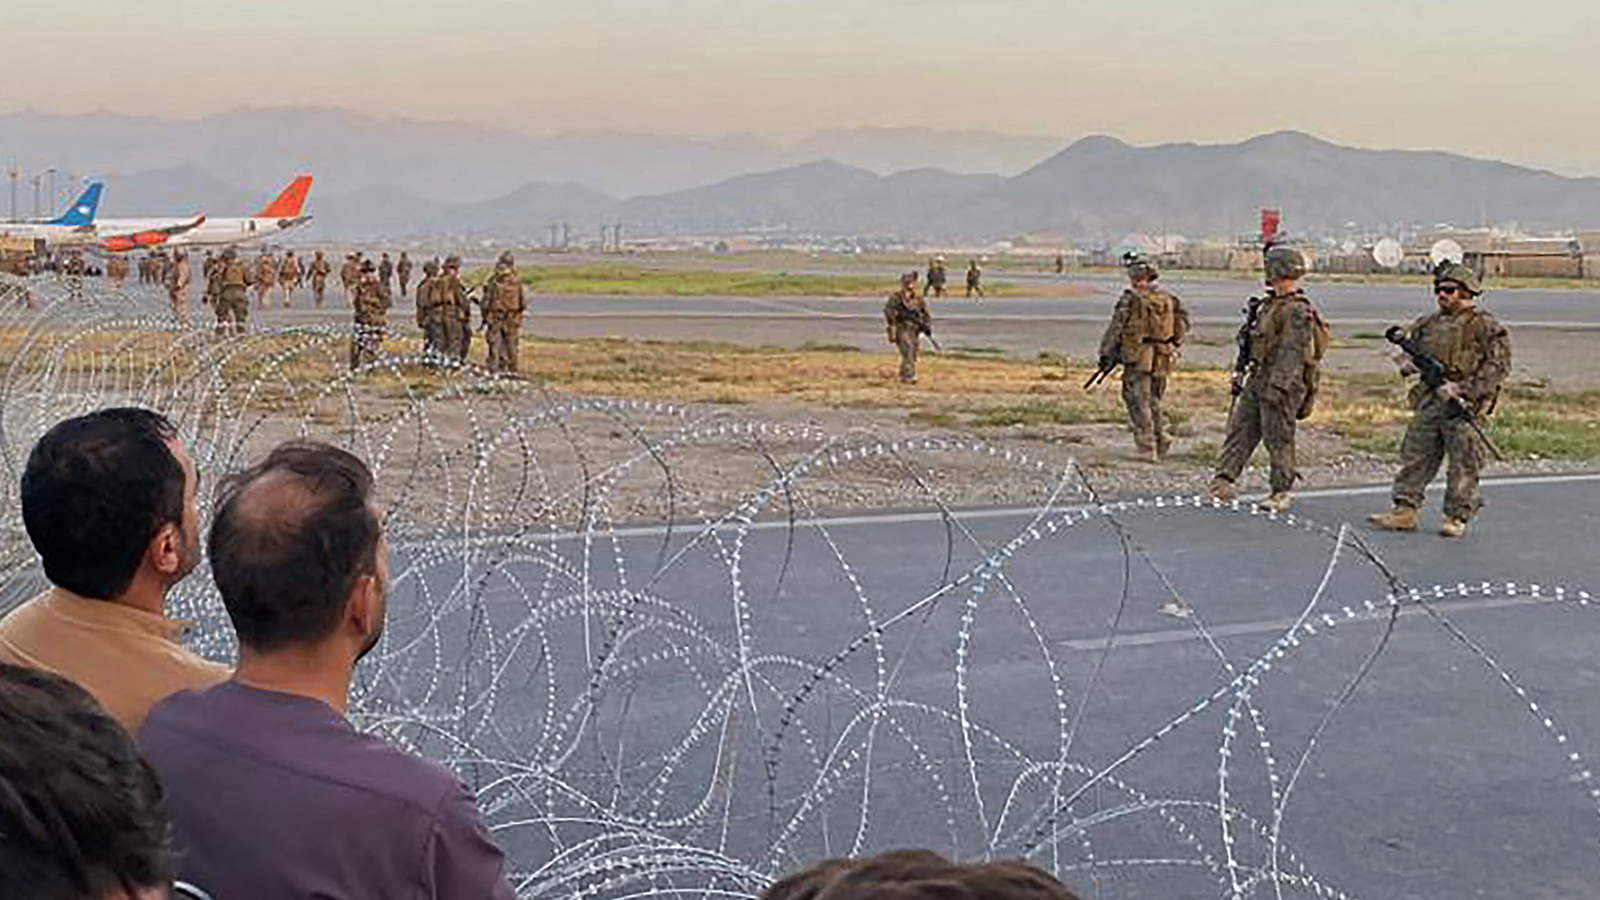 People in Afghanistan crowd at the airport as US soldiers stand guard in Kabul on August 16.